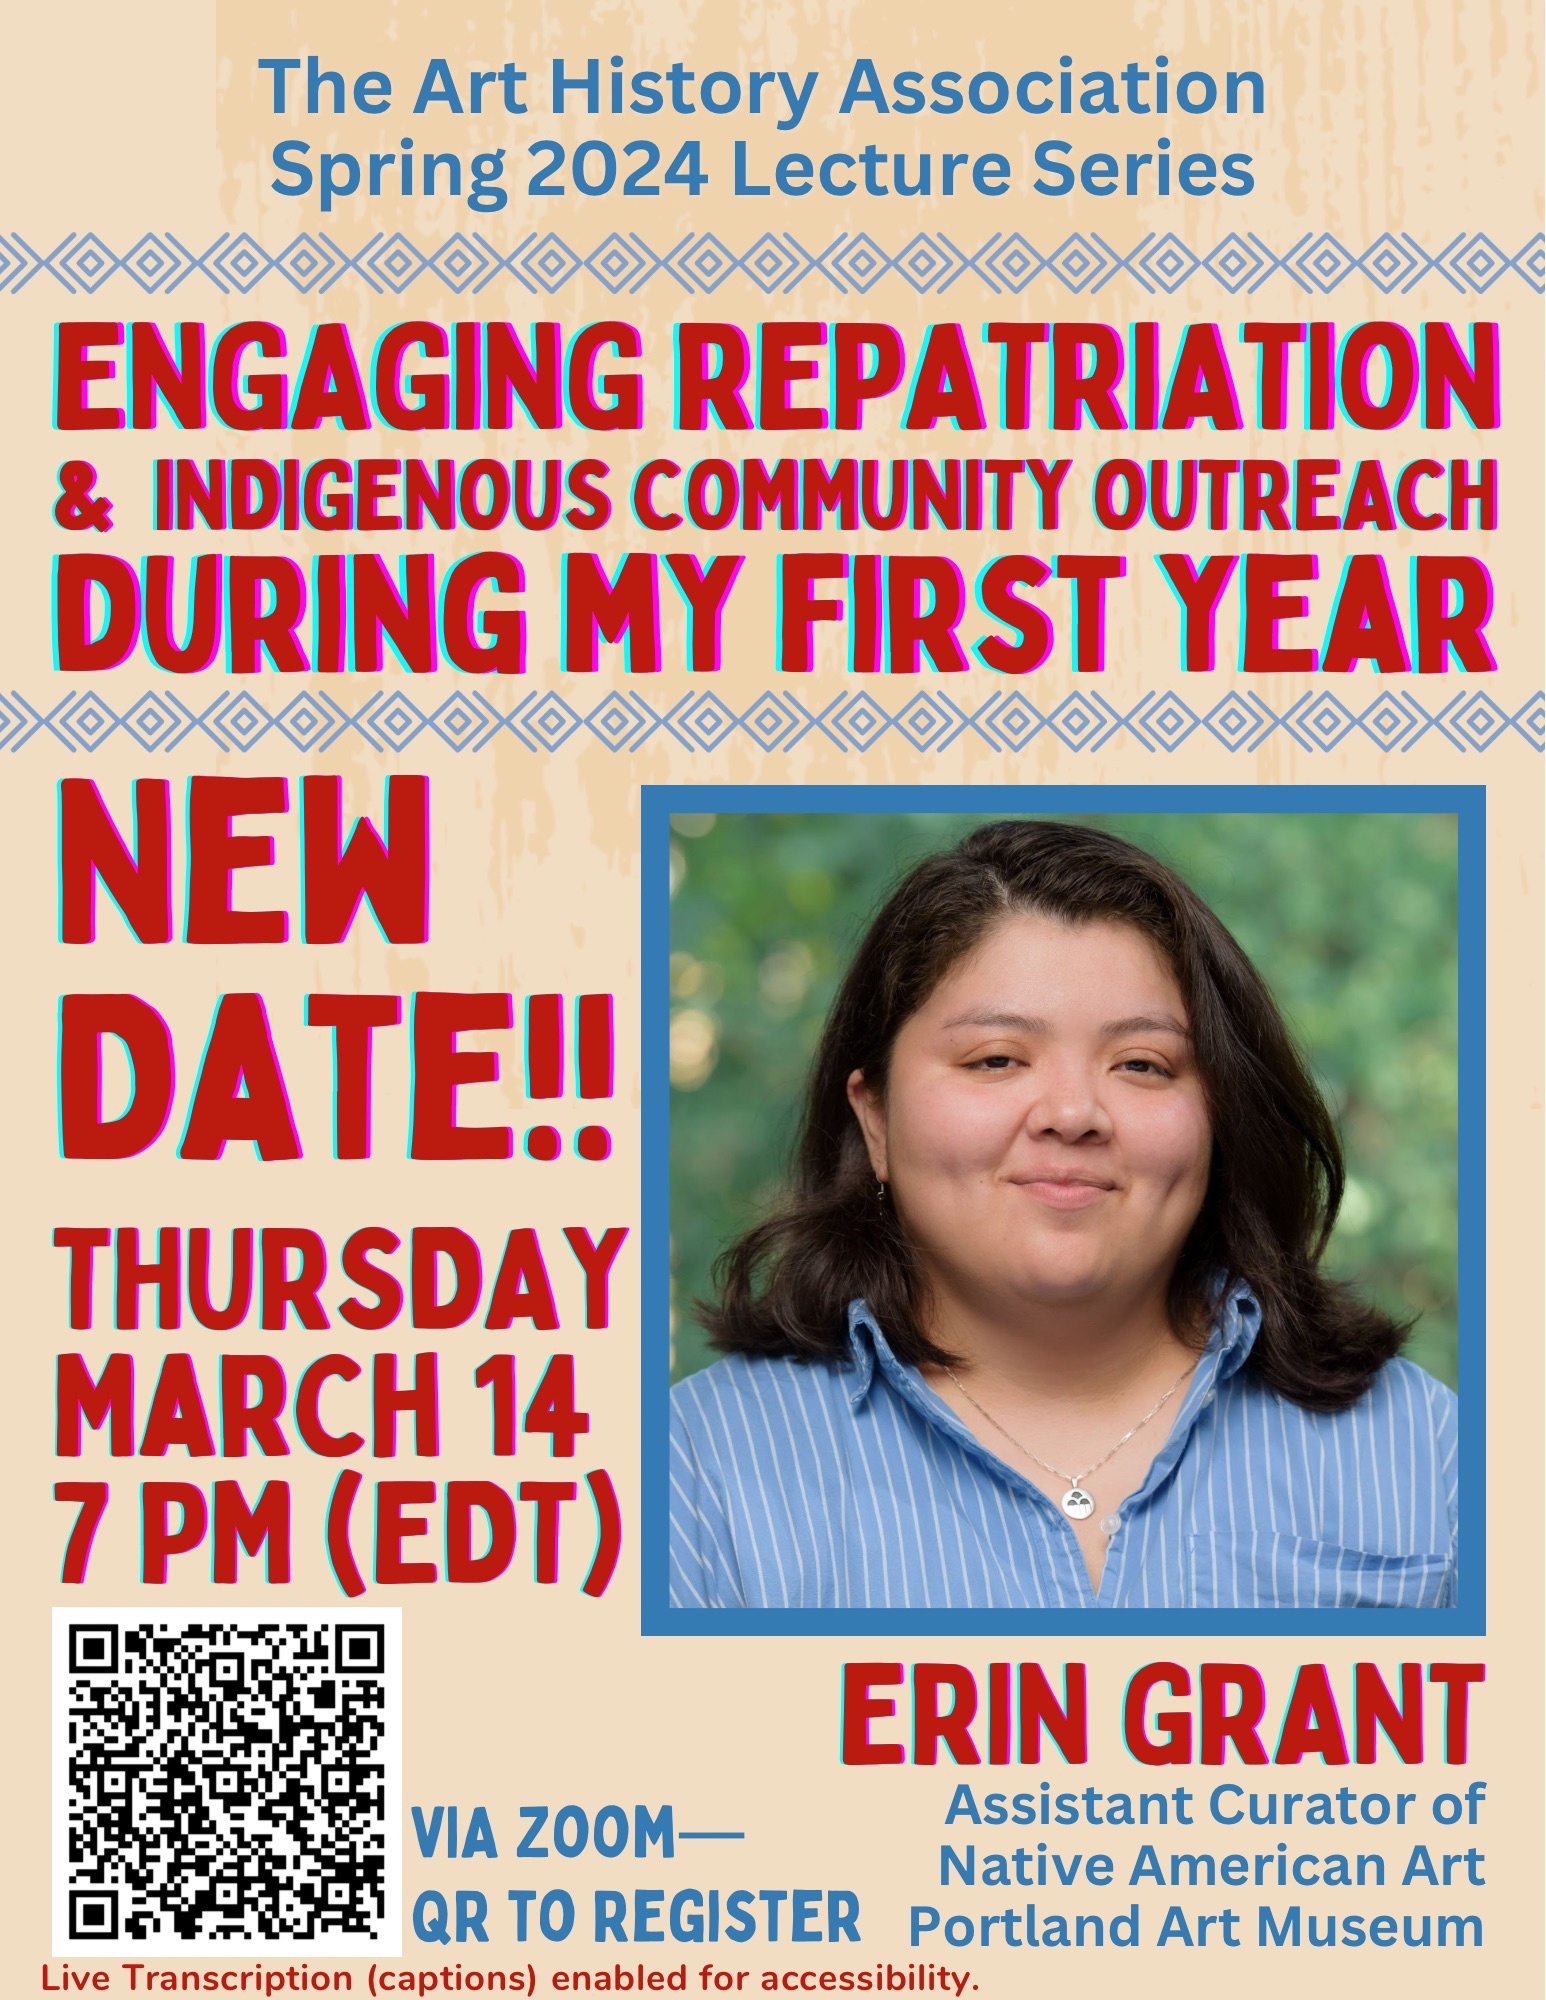 Fly for Zoom Talk by Erin Grant, Engaging Repatriation & Indigenous Community During My First Year, February 29, 2024 at 7:00PM